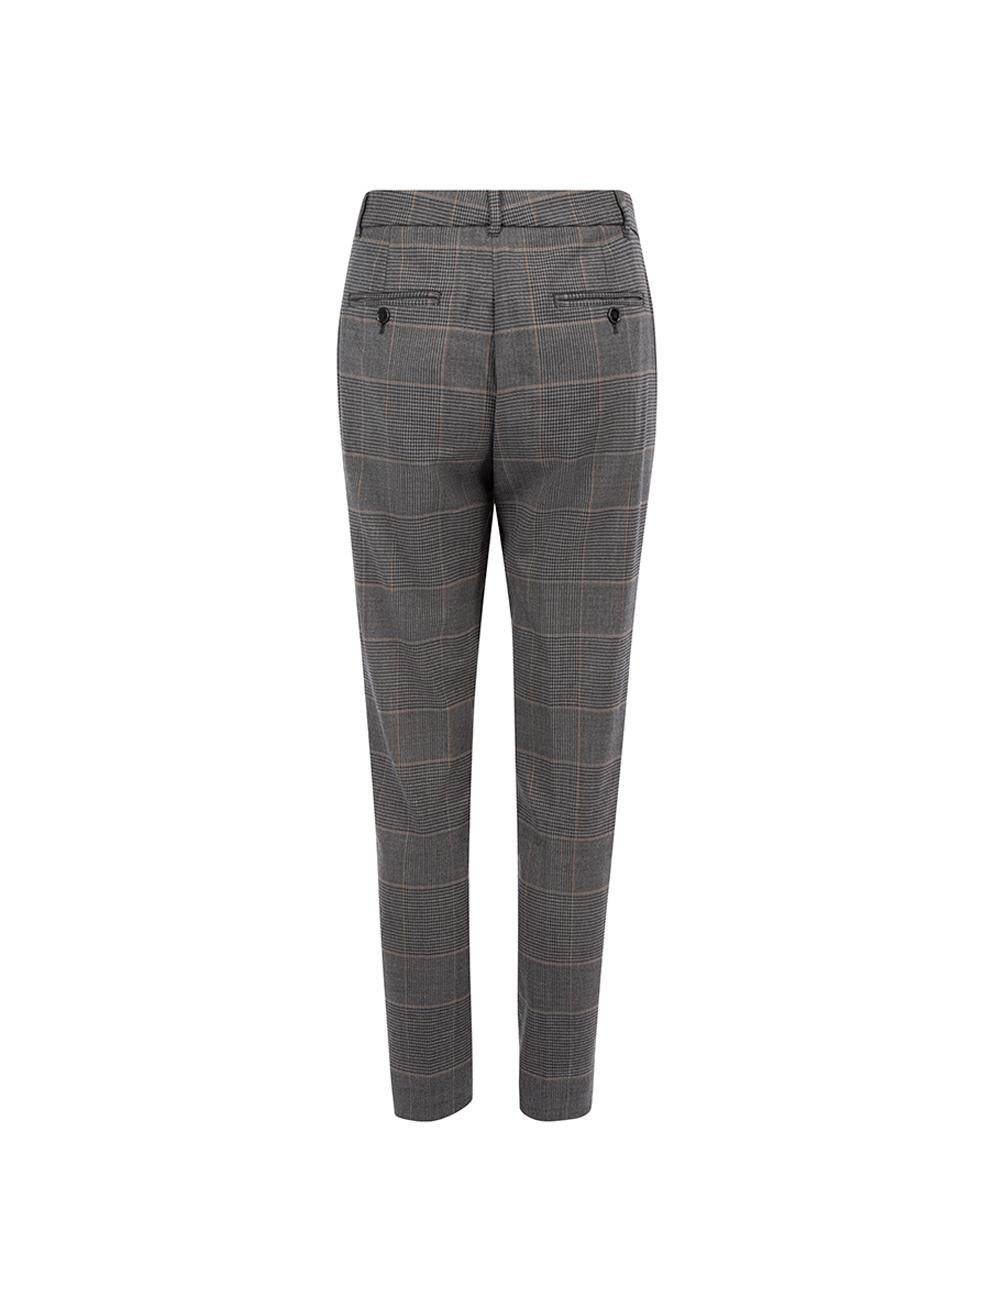 Dolce & Gabbana Women's Grey Plaid Slim Fit Trousers In Excellent Condition For Sale In London, GB